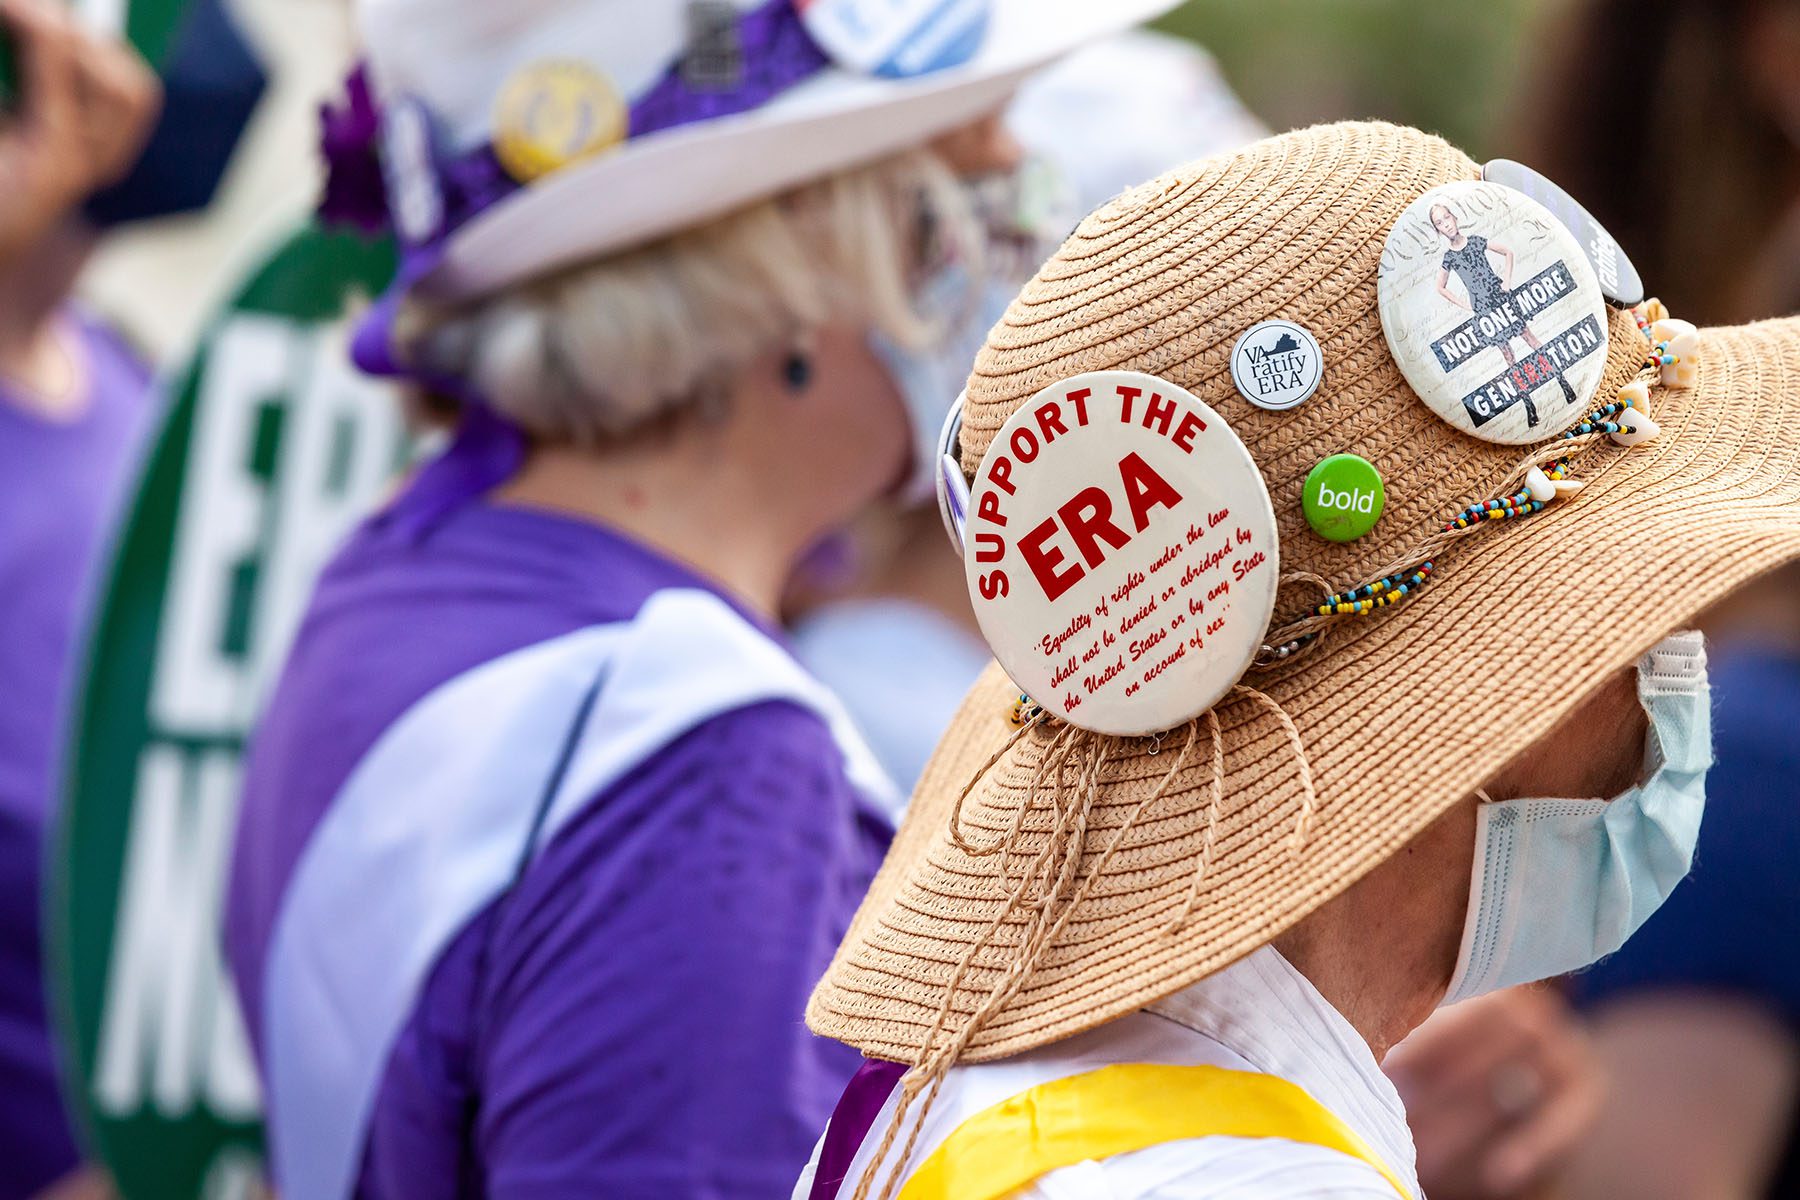 Demonstrators dressed in suffragette outfits rally near the Supreme Court. Pins on one woman's hat read "Support the ERA," "VA ratify ERA" and "No one more generation"